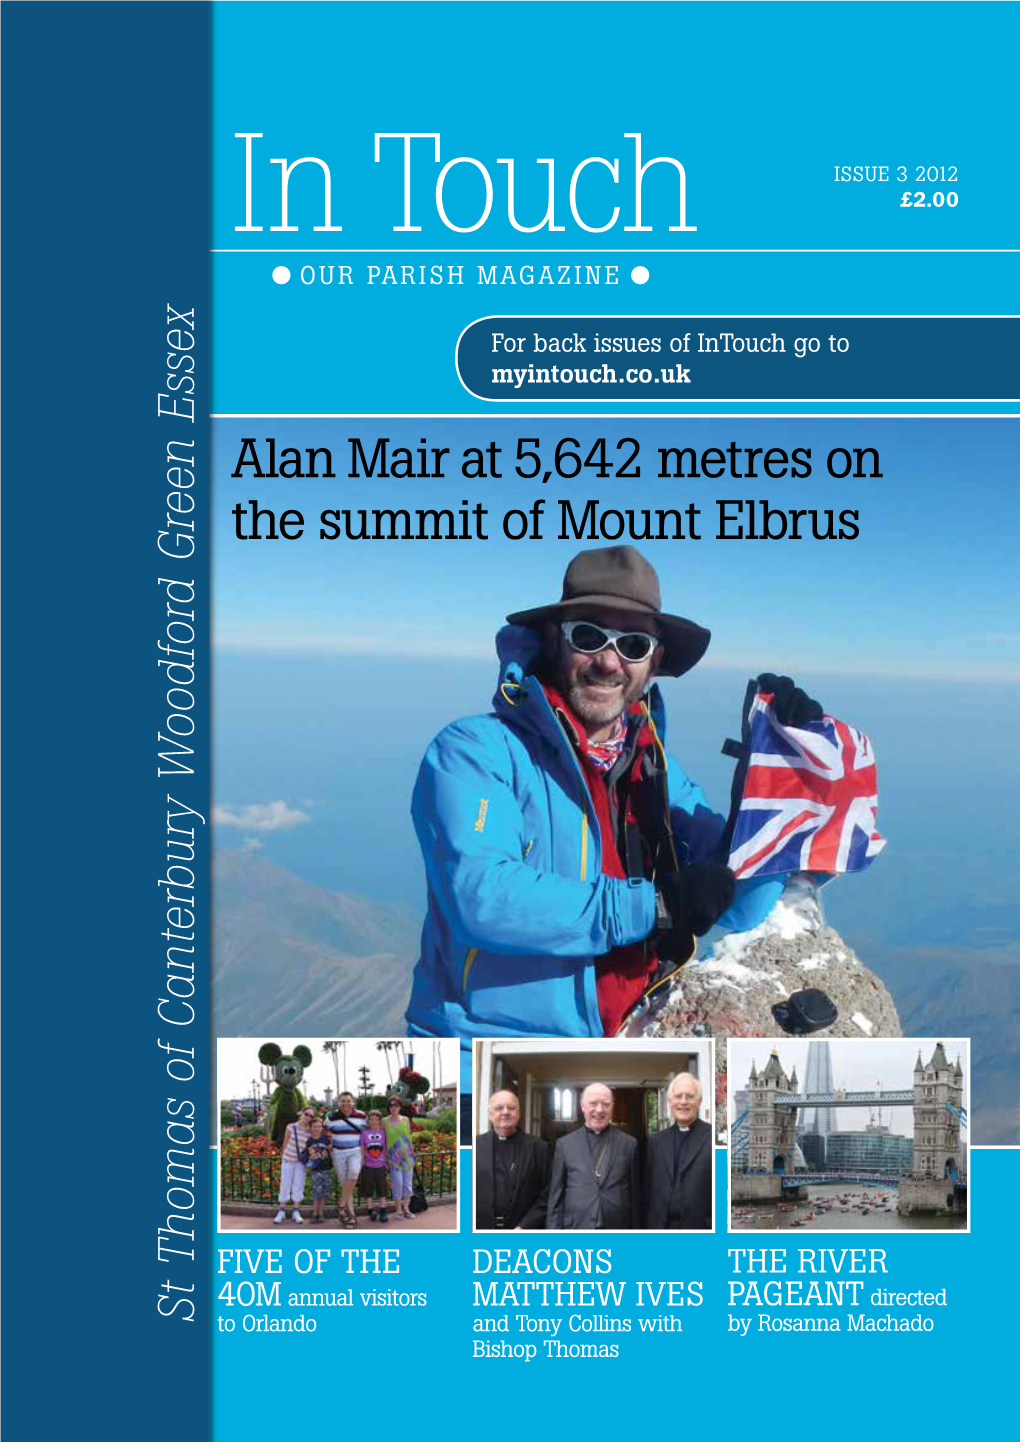 Alan Mair at 5,642 Metres on the Summit of Mount Elbrus Woodford Green Essex Woodford Y of Canterbur